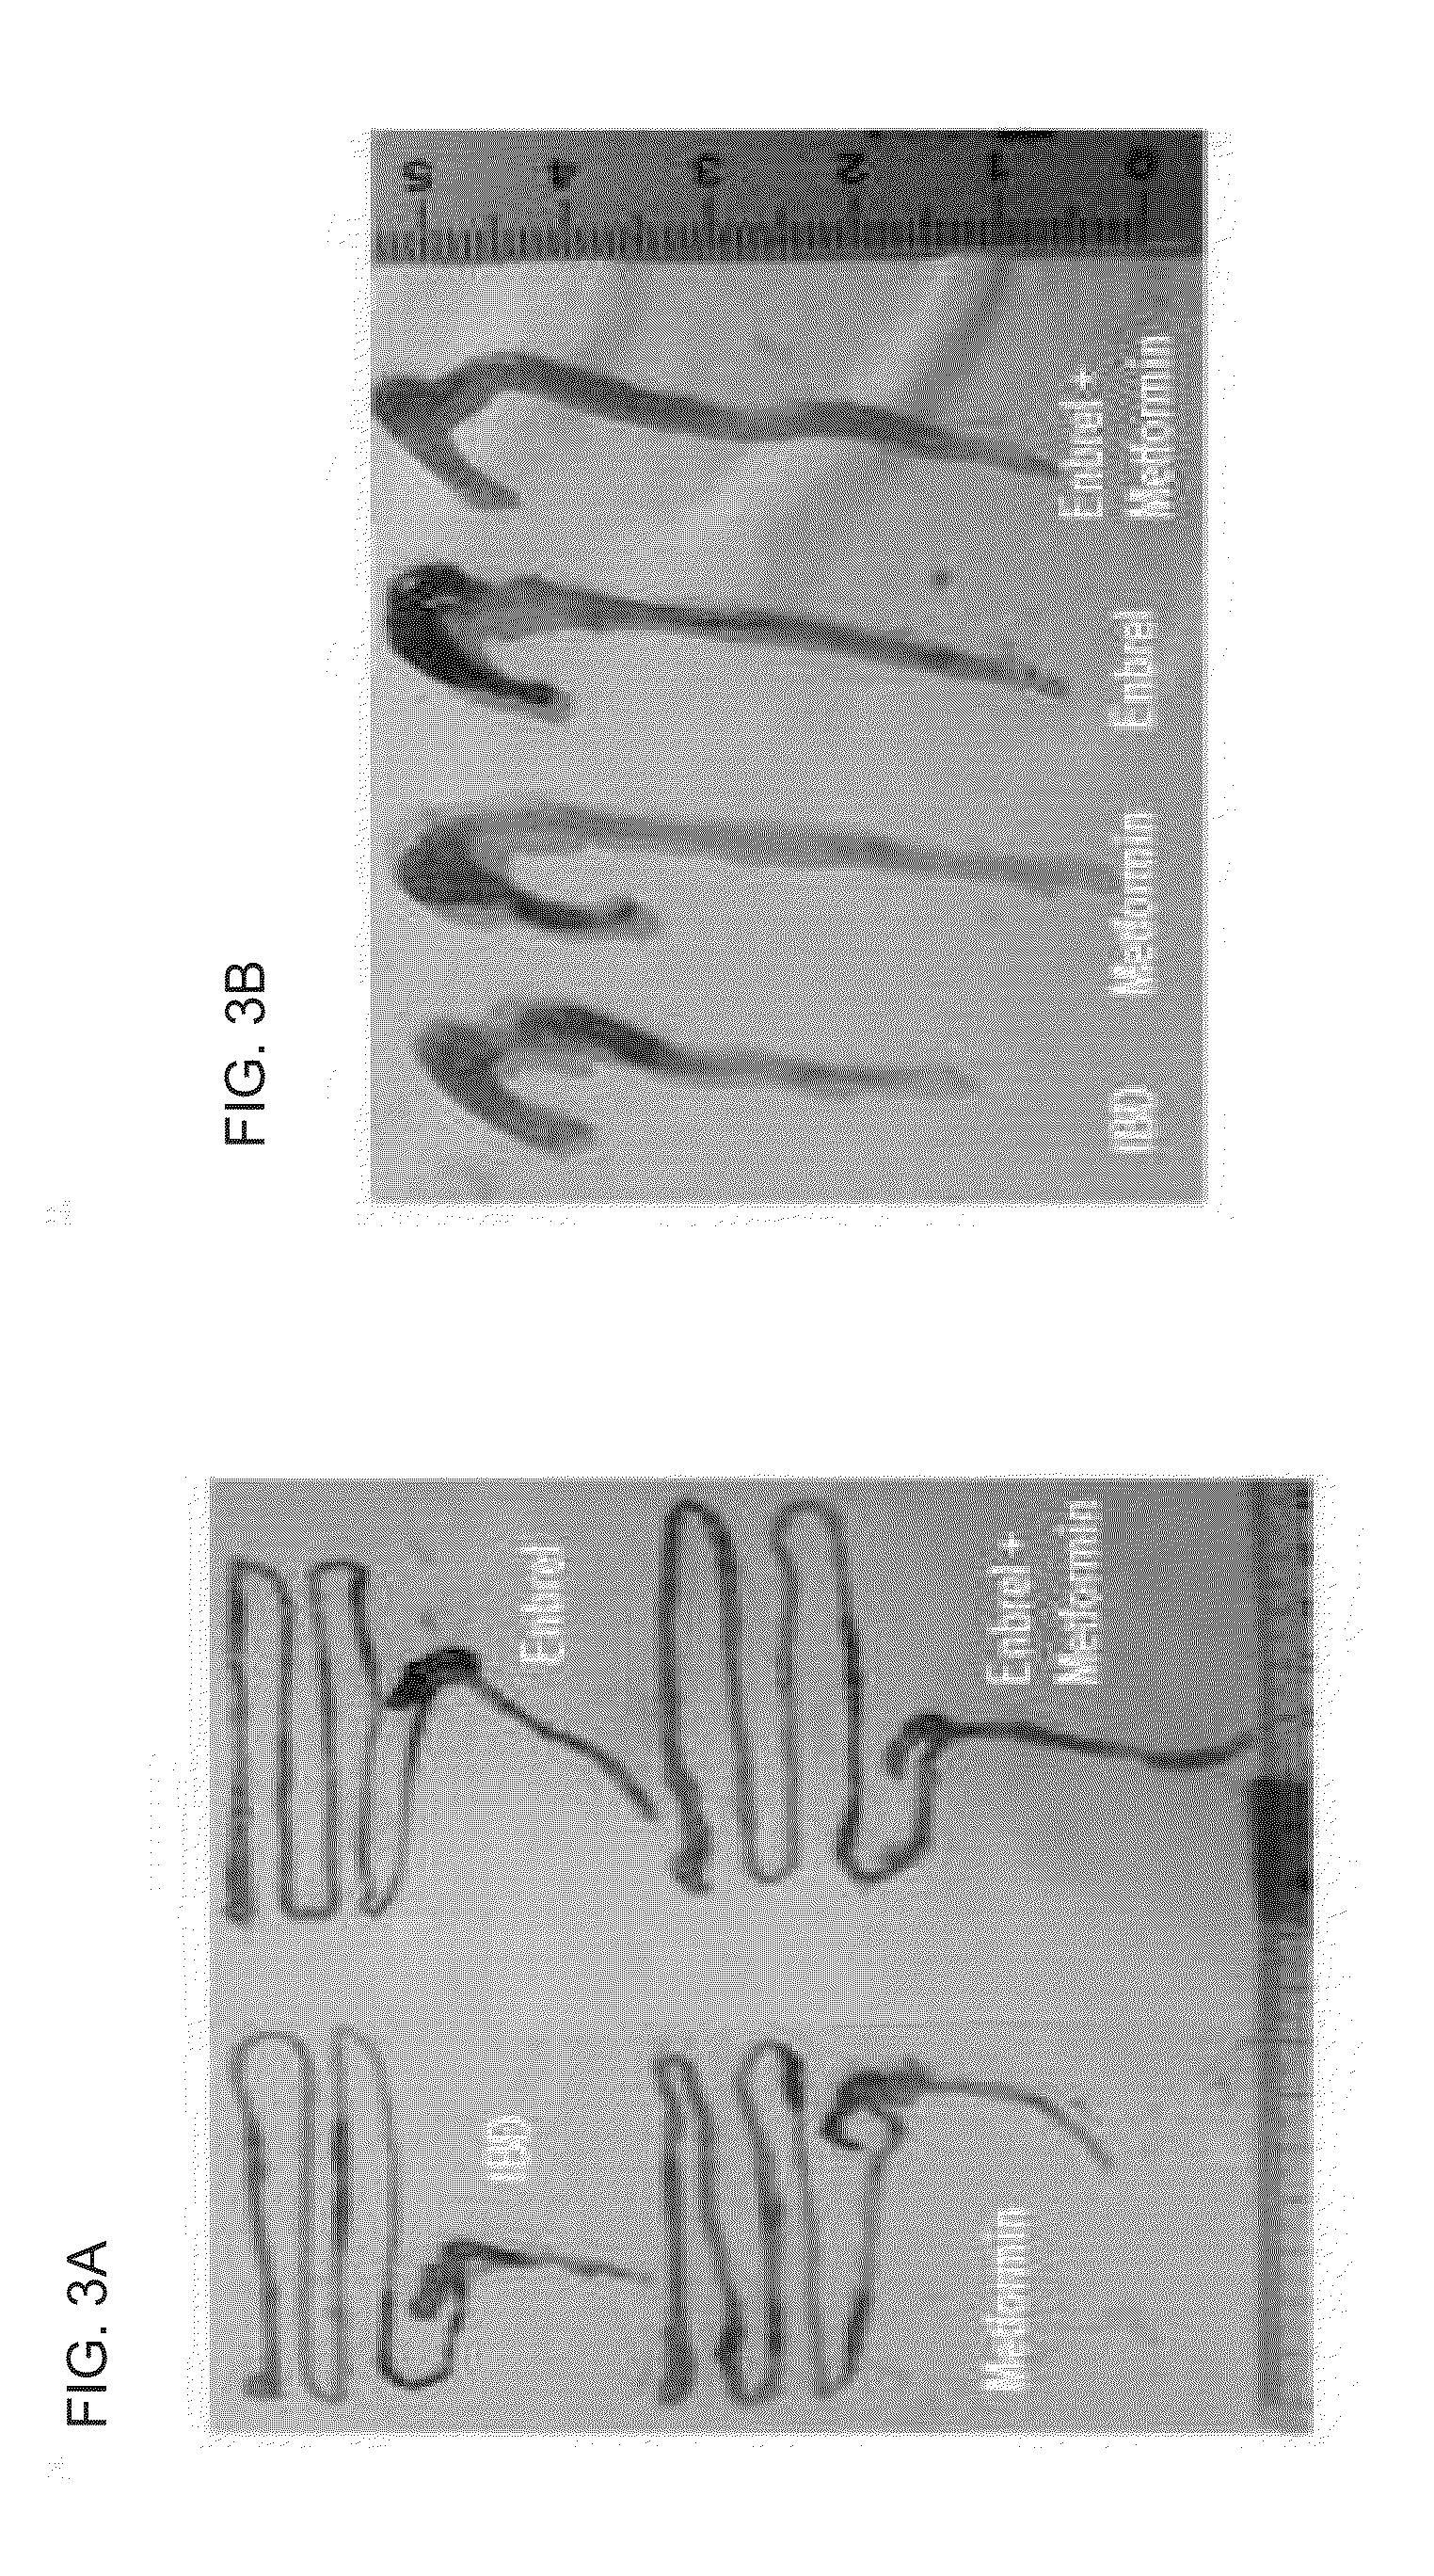 Composition comprising metformin as active ingredient for preventing or treating inflammatory bowel disease